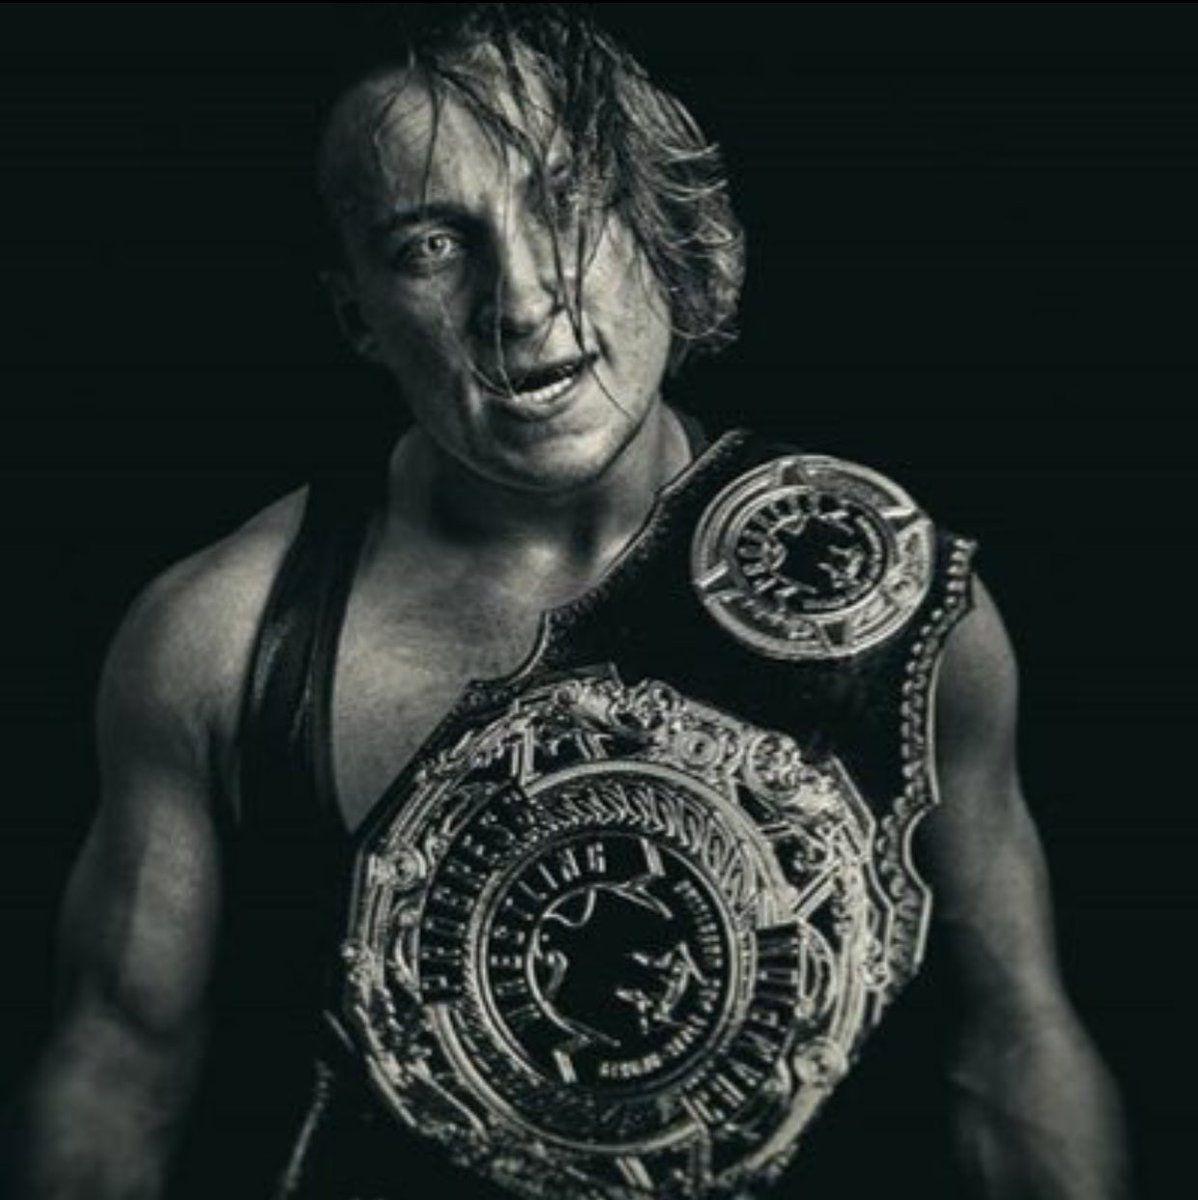 Pete Dunne you tweet 'cheap jack swagger' at me